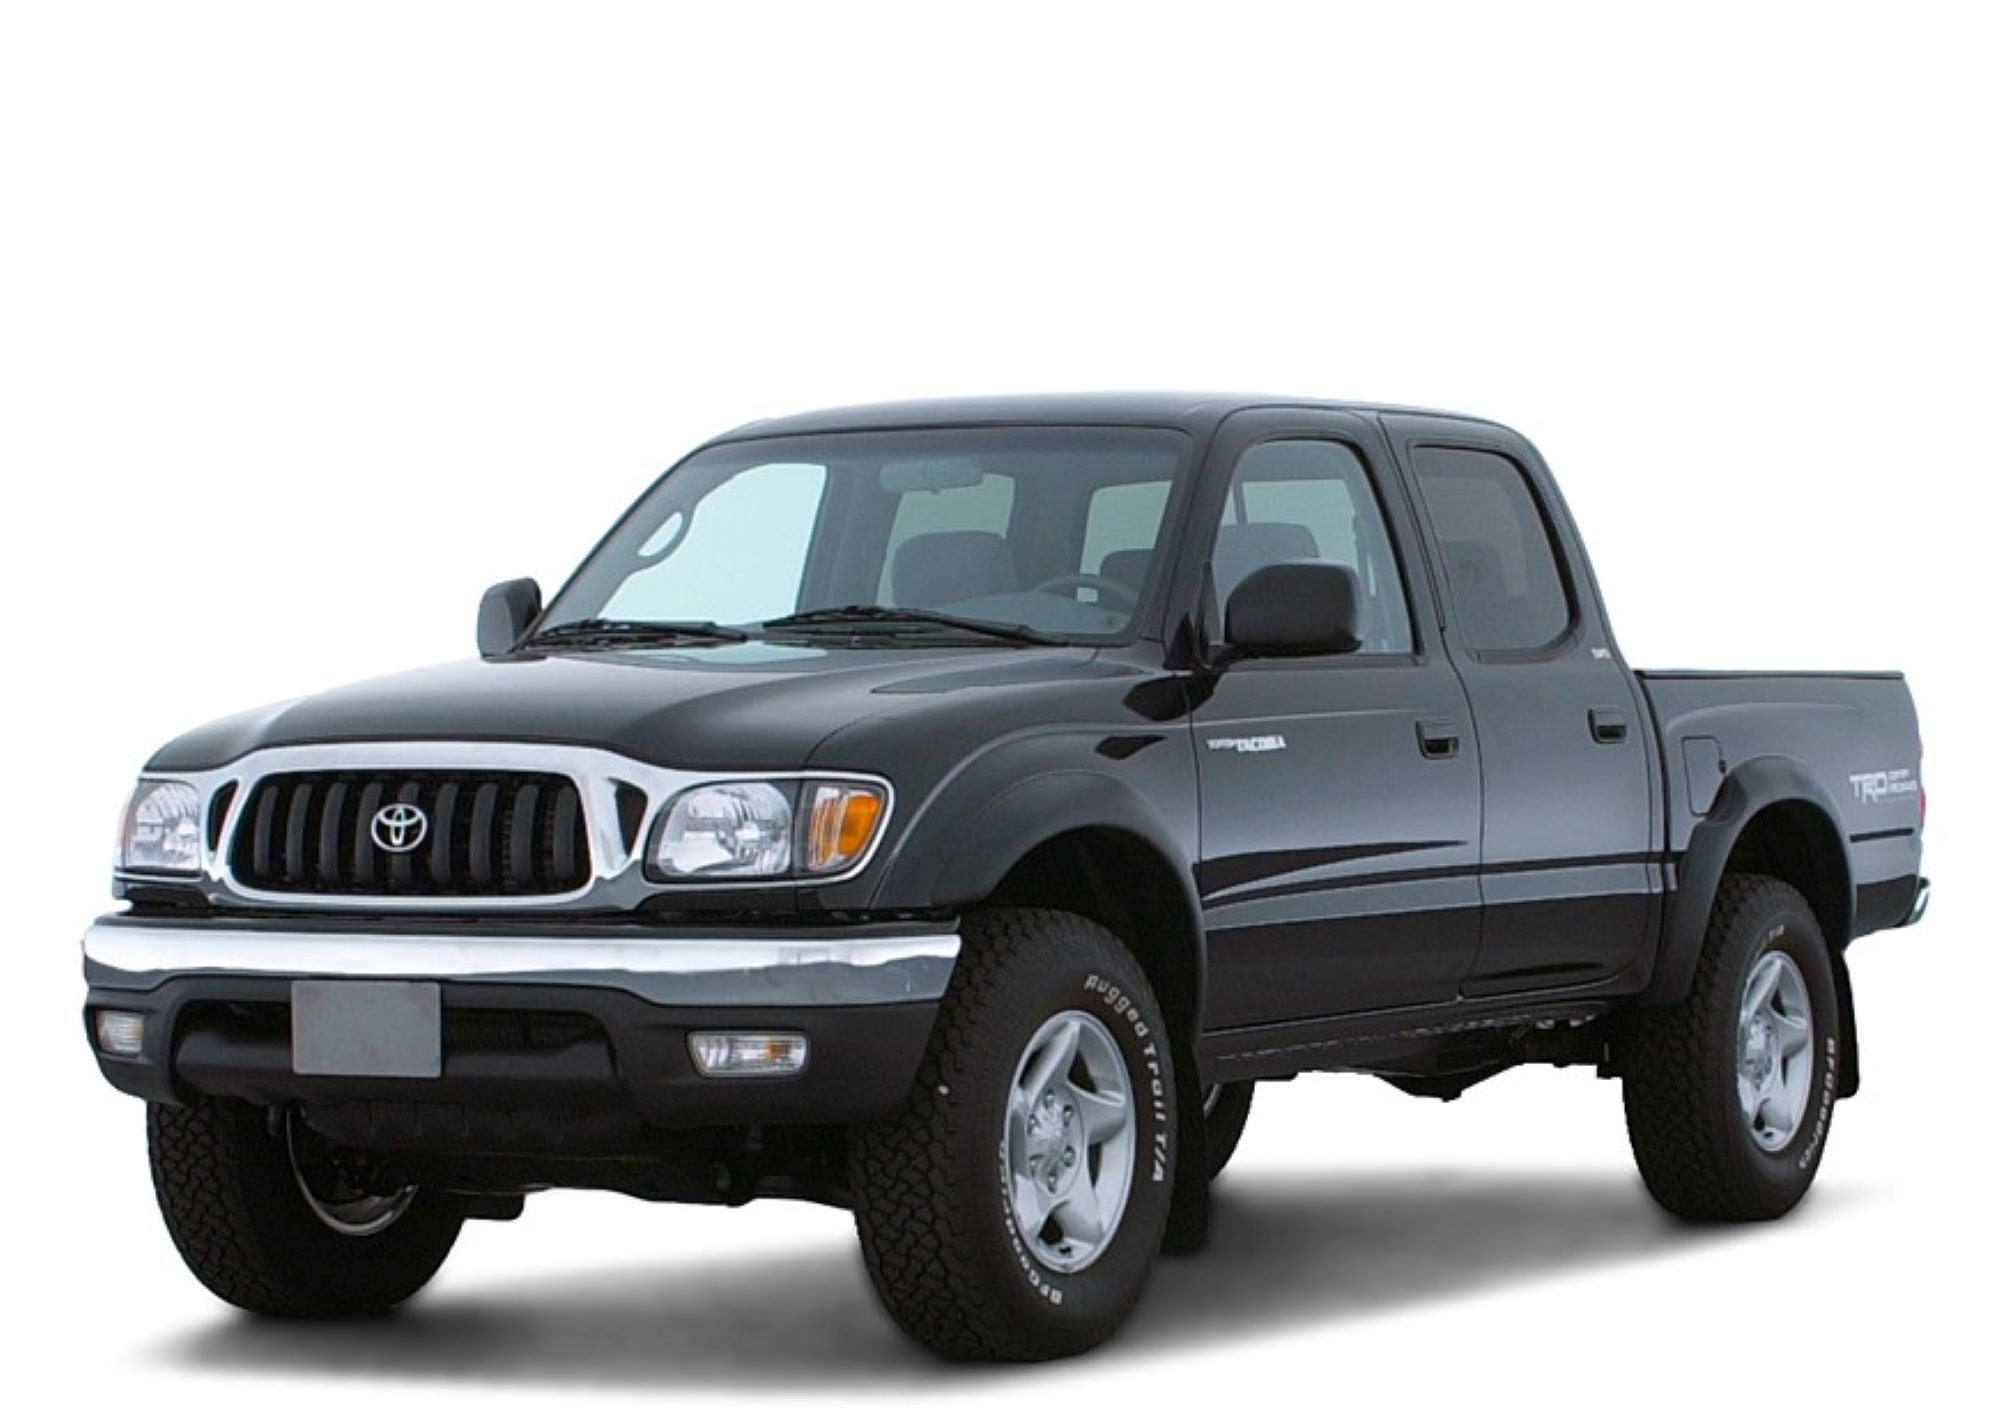 2001 Toyota Tacoma, Chrome Packages, Tacoma Configurations, Highway Safety, Ride Quality